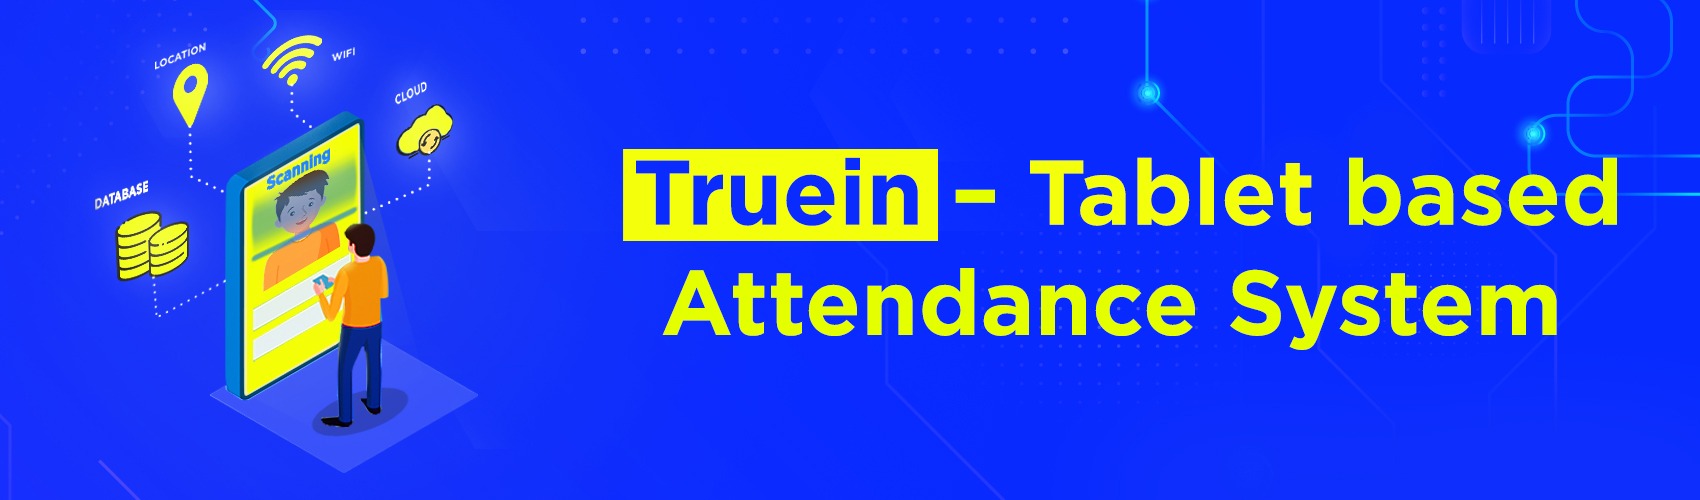 Truein - Tablet Based Biometric Attendance System Using Face Recognition